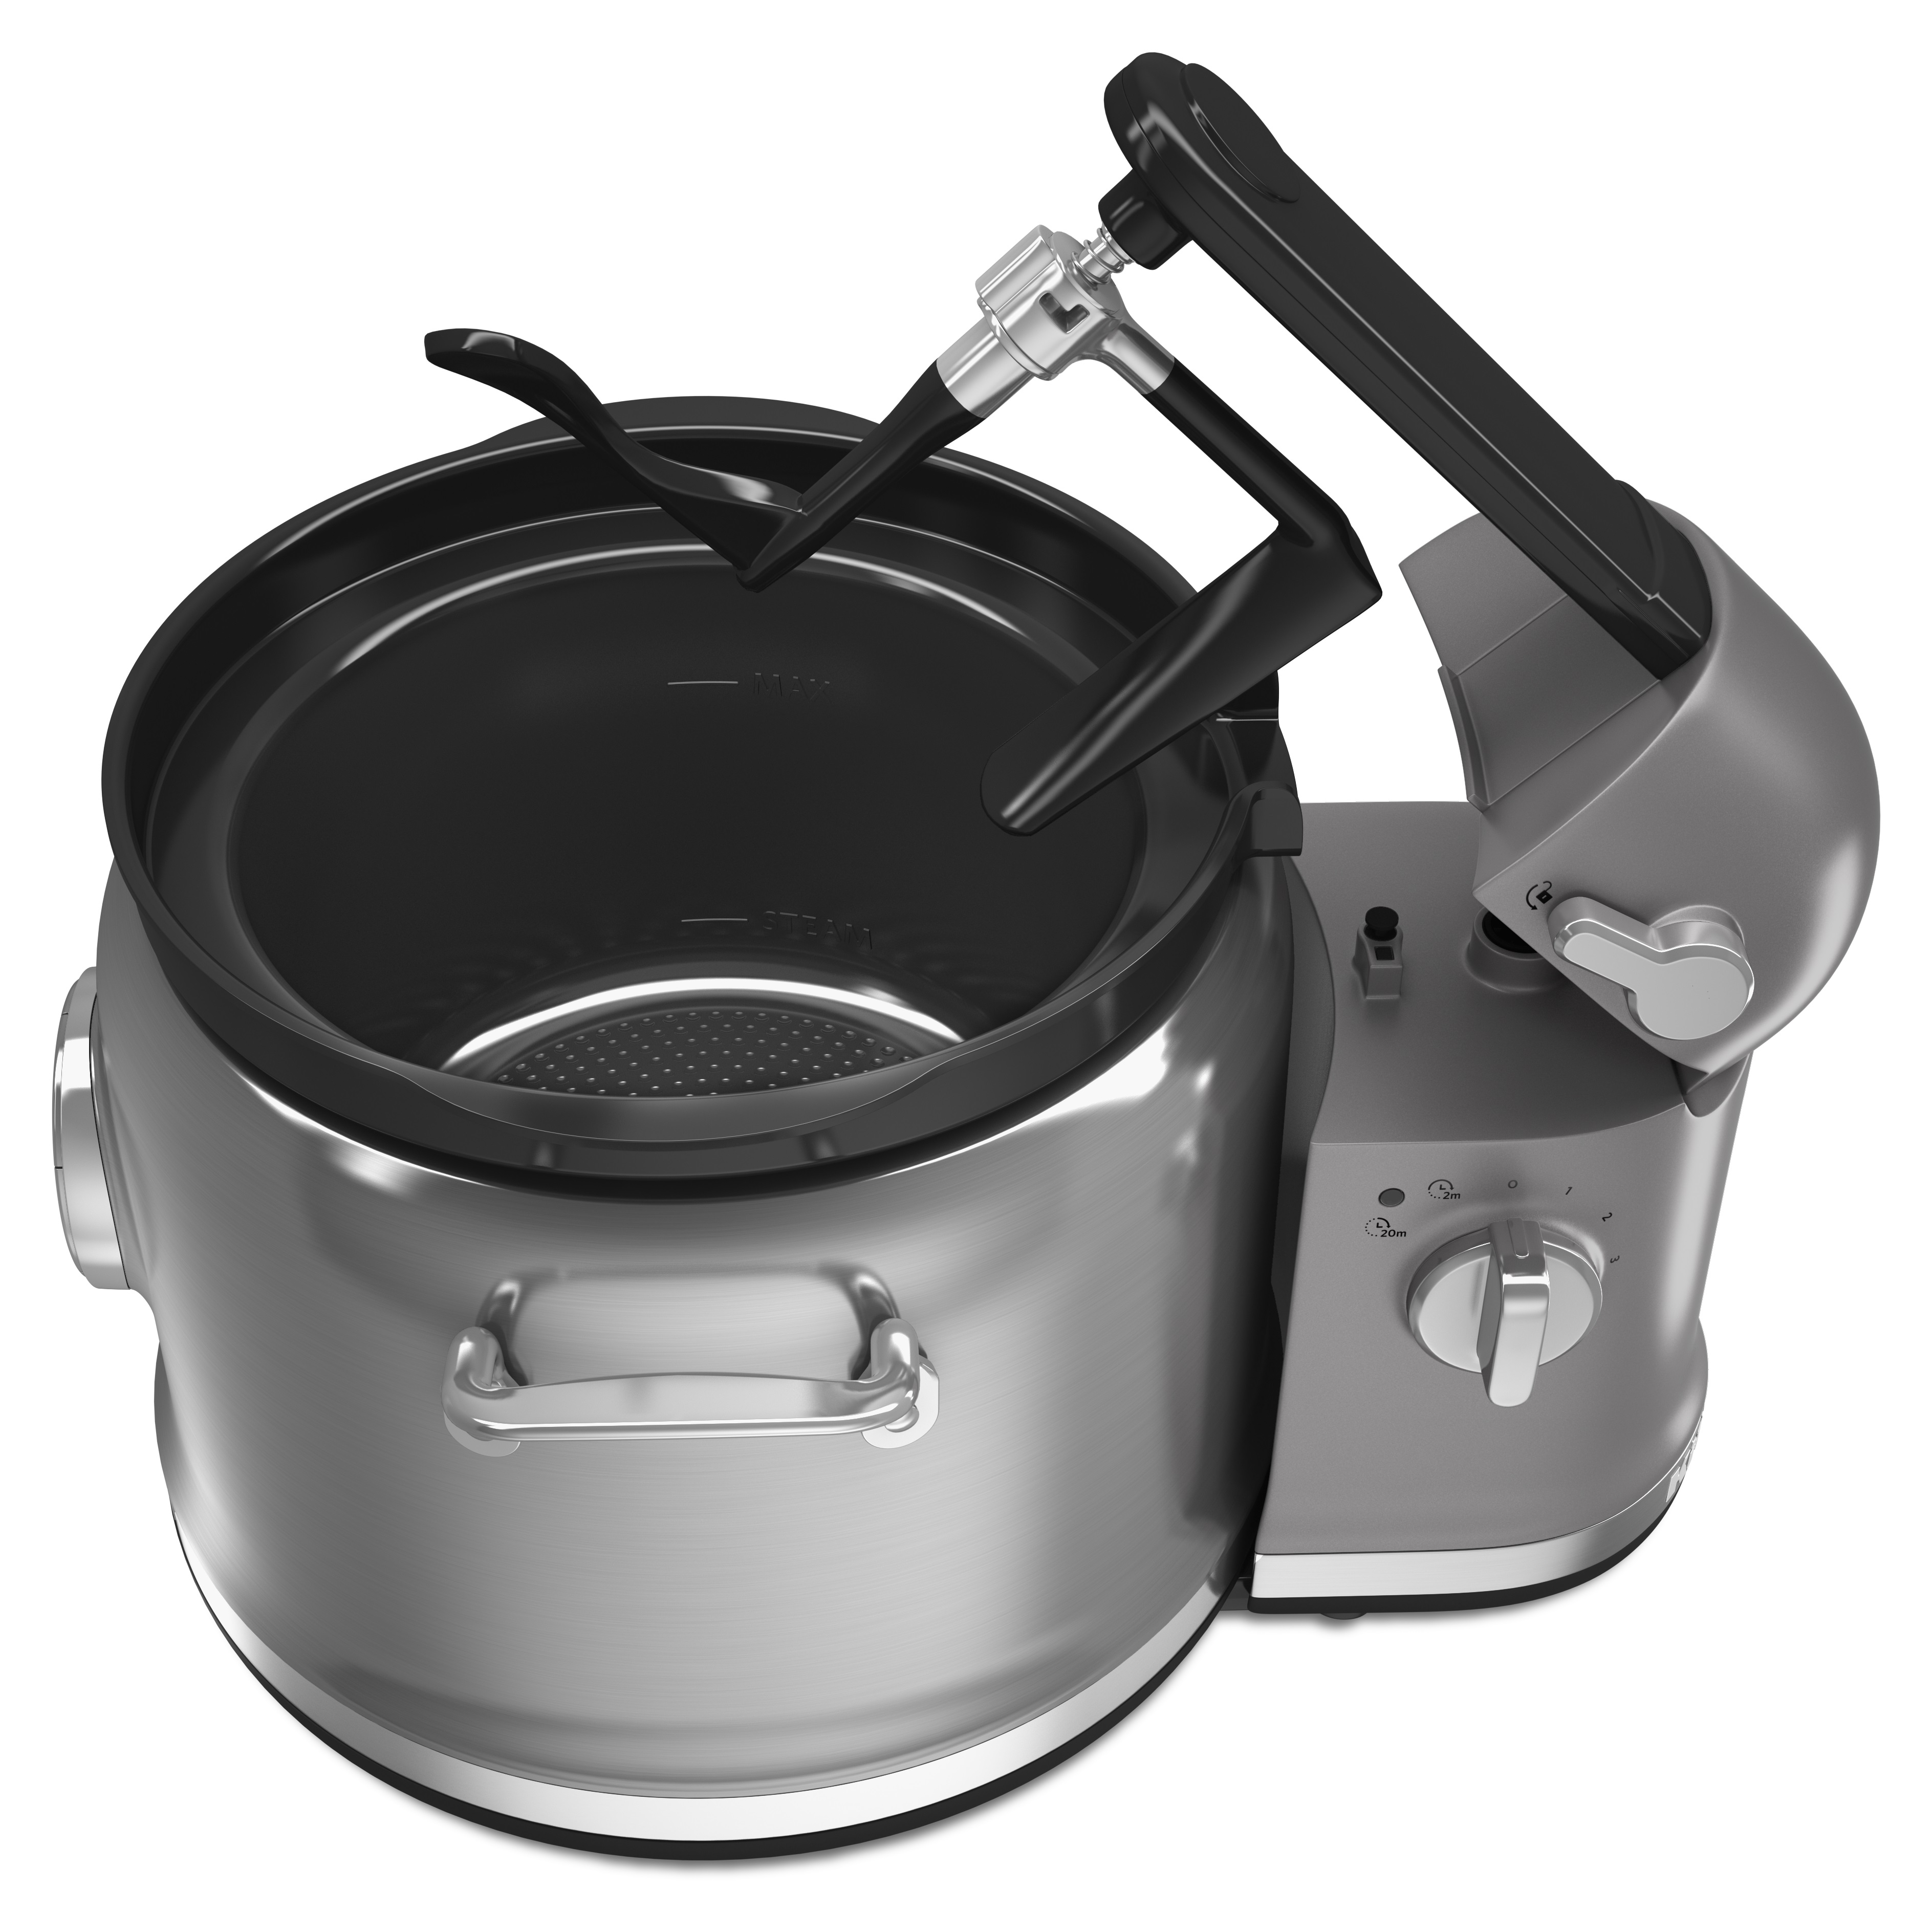 KitchenAid® multi-cooker offers cooks extra help